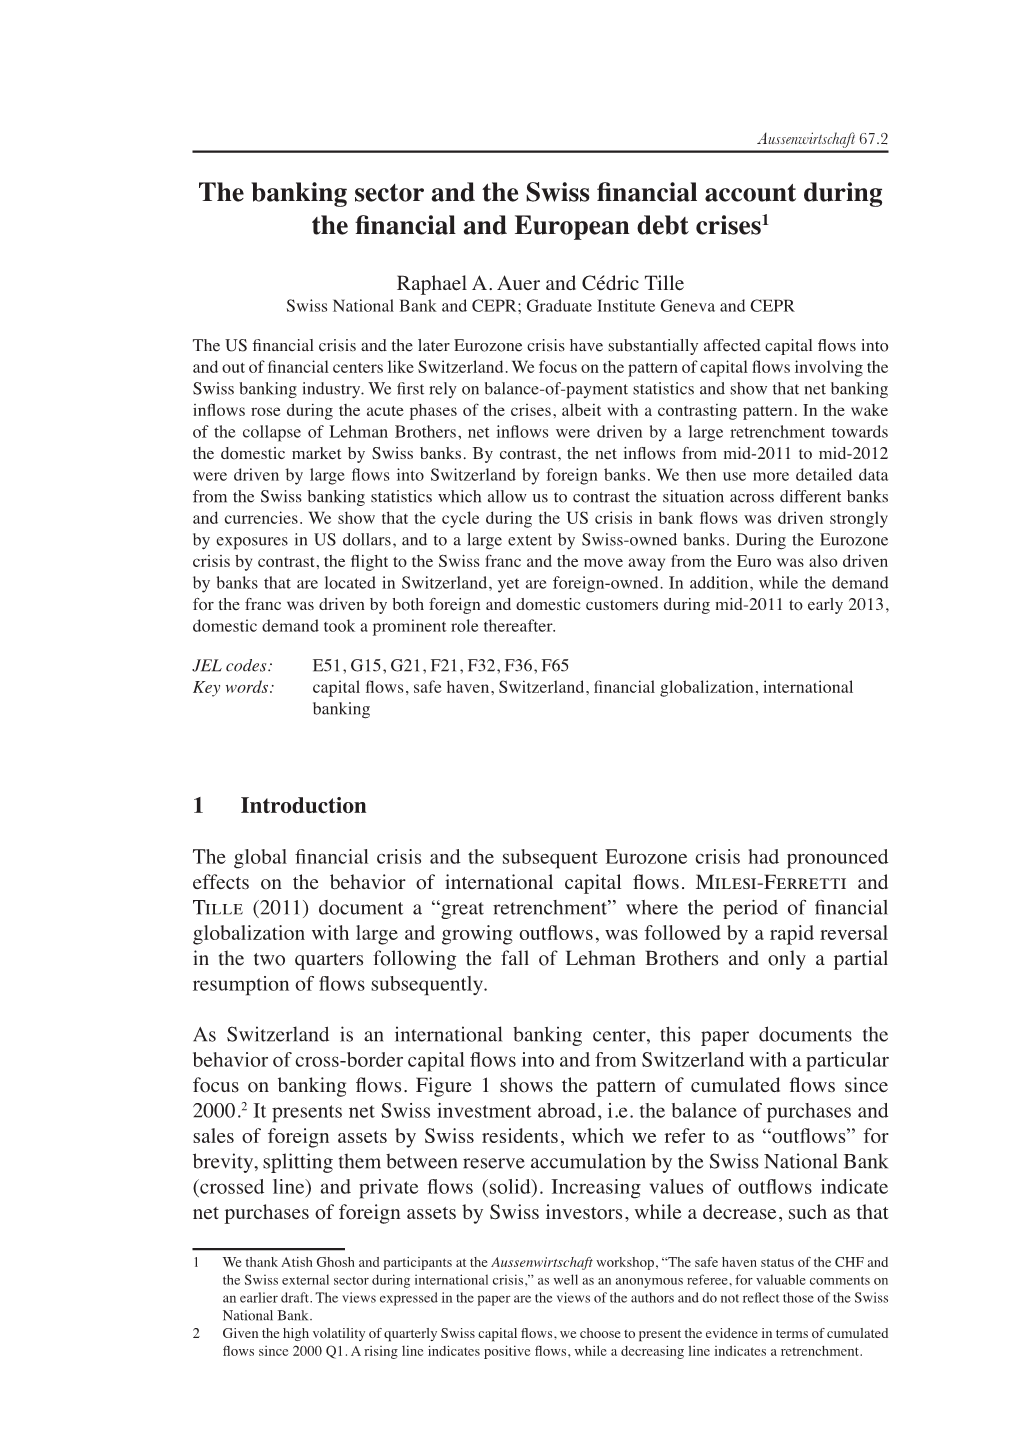 The Banking Sector and the Swiss Financial Account During the Financial and European Debt Crises1